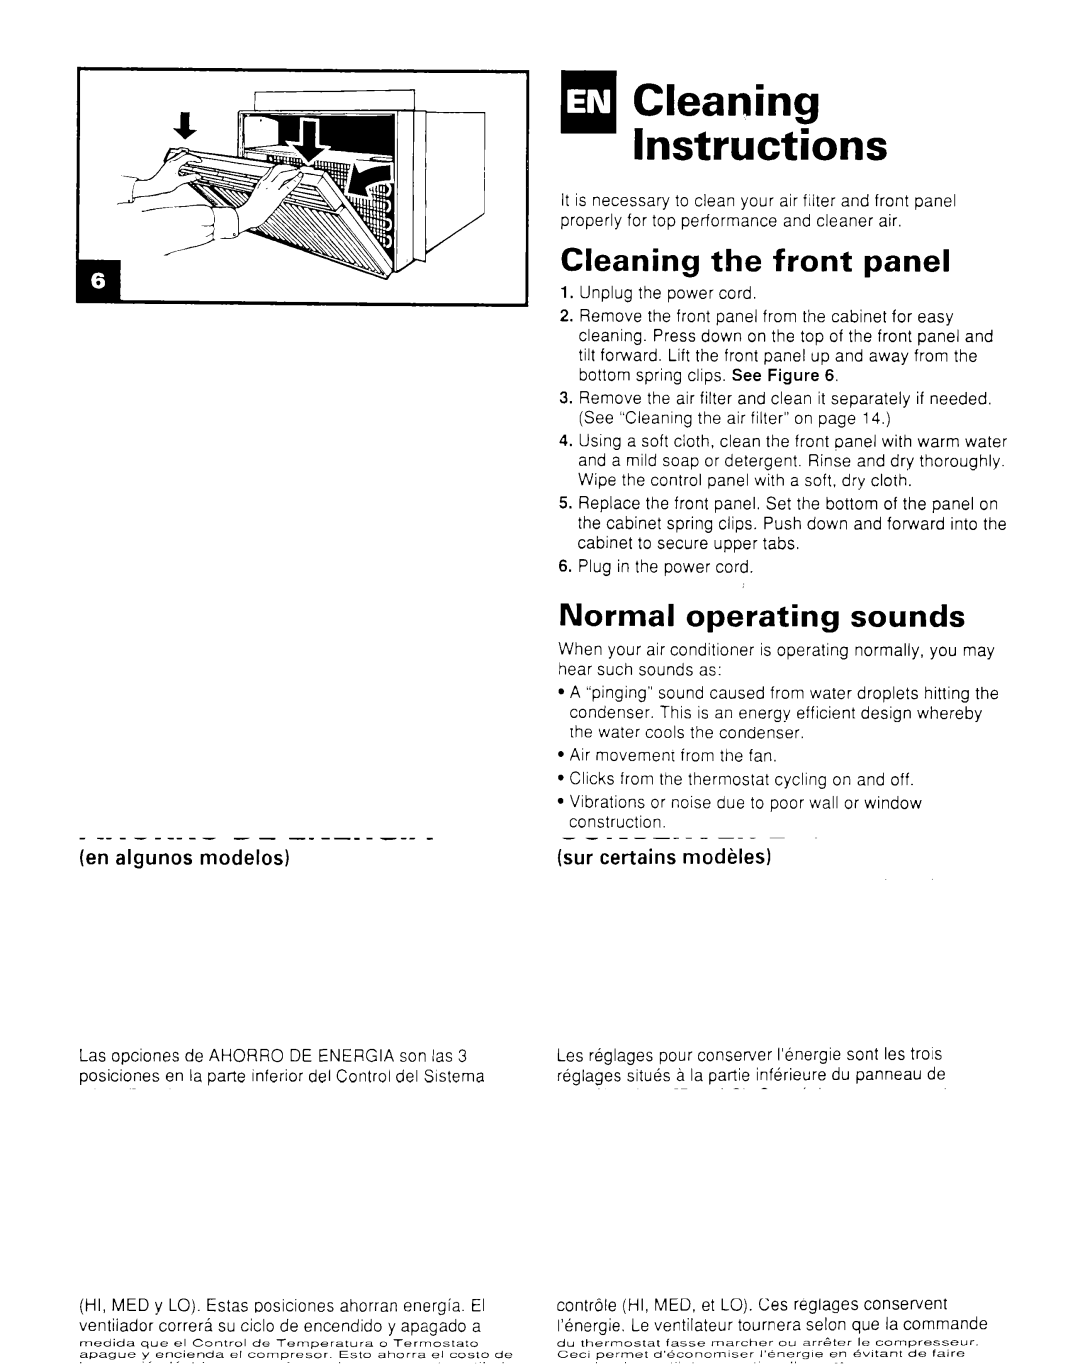 Whirlpool CA8WR42 manual CleaningInstructions, Cleaning the front panel, Normal operating sounds 